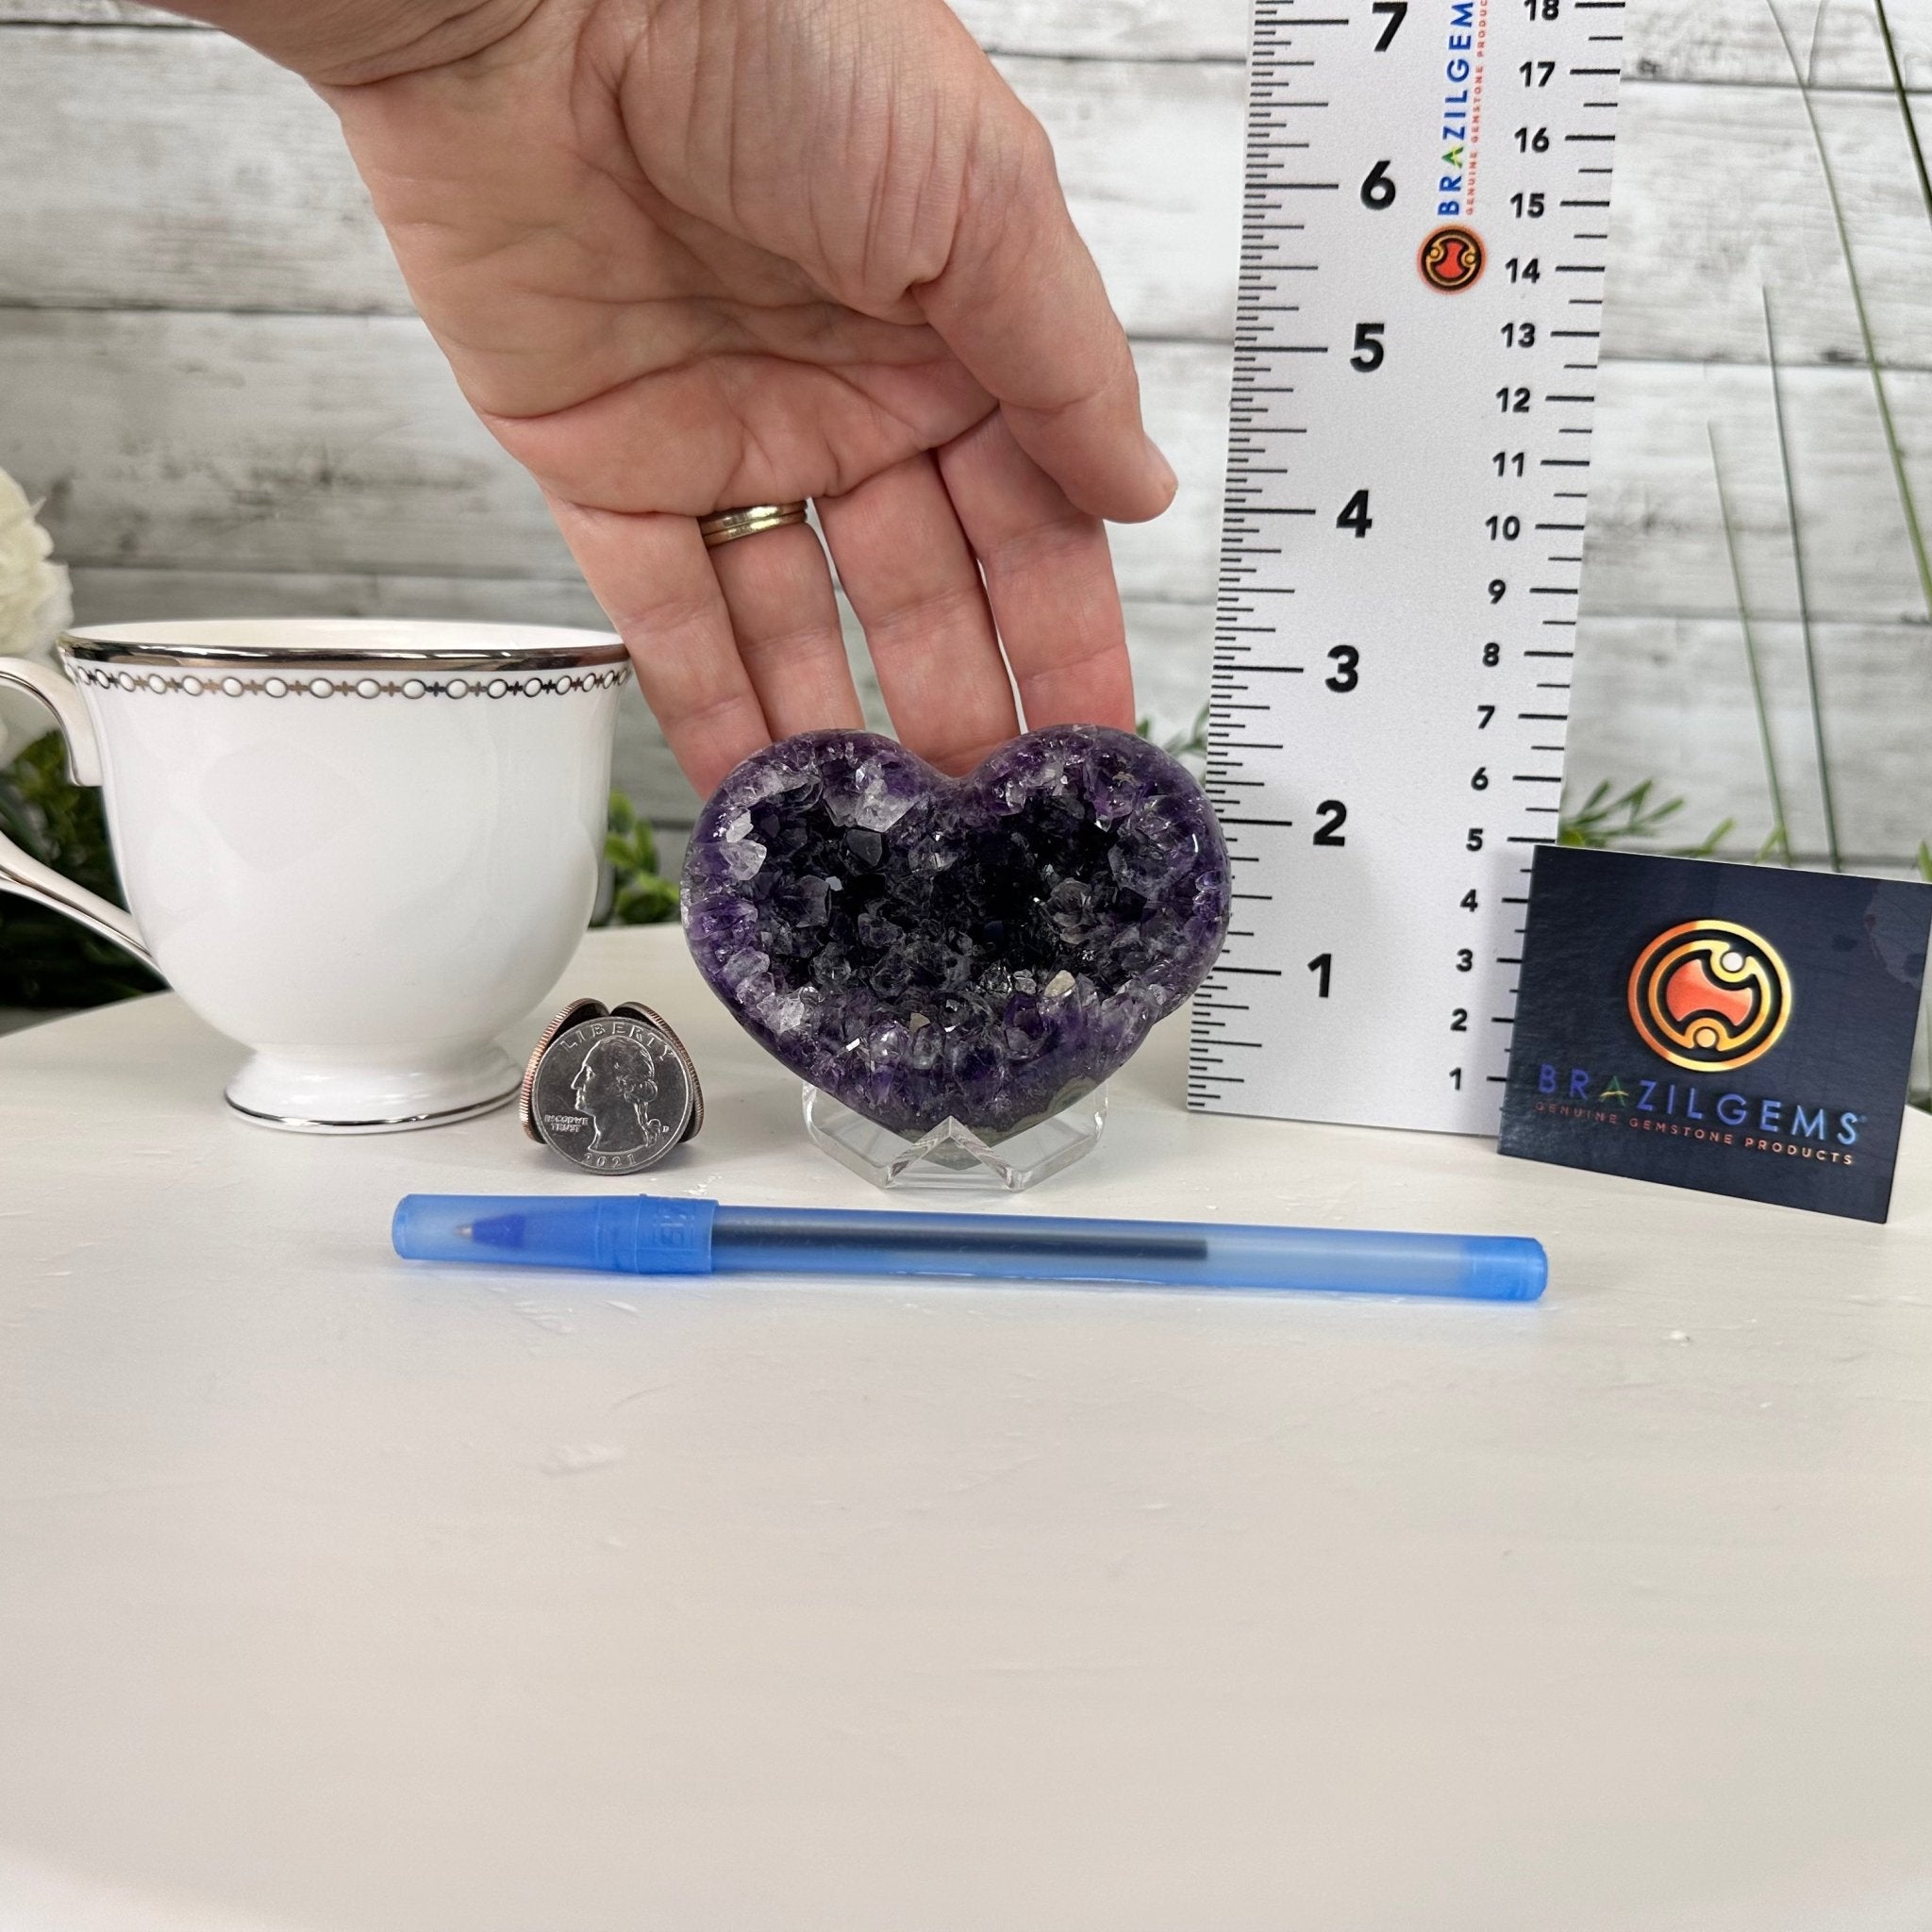 Extra Plus Quality Amethyst Heart Geode on an Acrylic Stand, 0.53 lbs & 2.5" Tall #5462-0040 by Brazil Gems - Brazil GemsBrazil GemsExtra Plus Quality Amethyst Heart Geode on an Acrylic Stand, 0.53 lbs & 2.5" Tall #5462-0040 by Brazil GemsHearts5462-0040